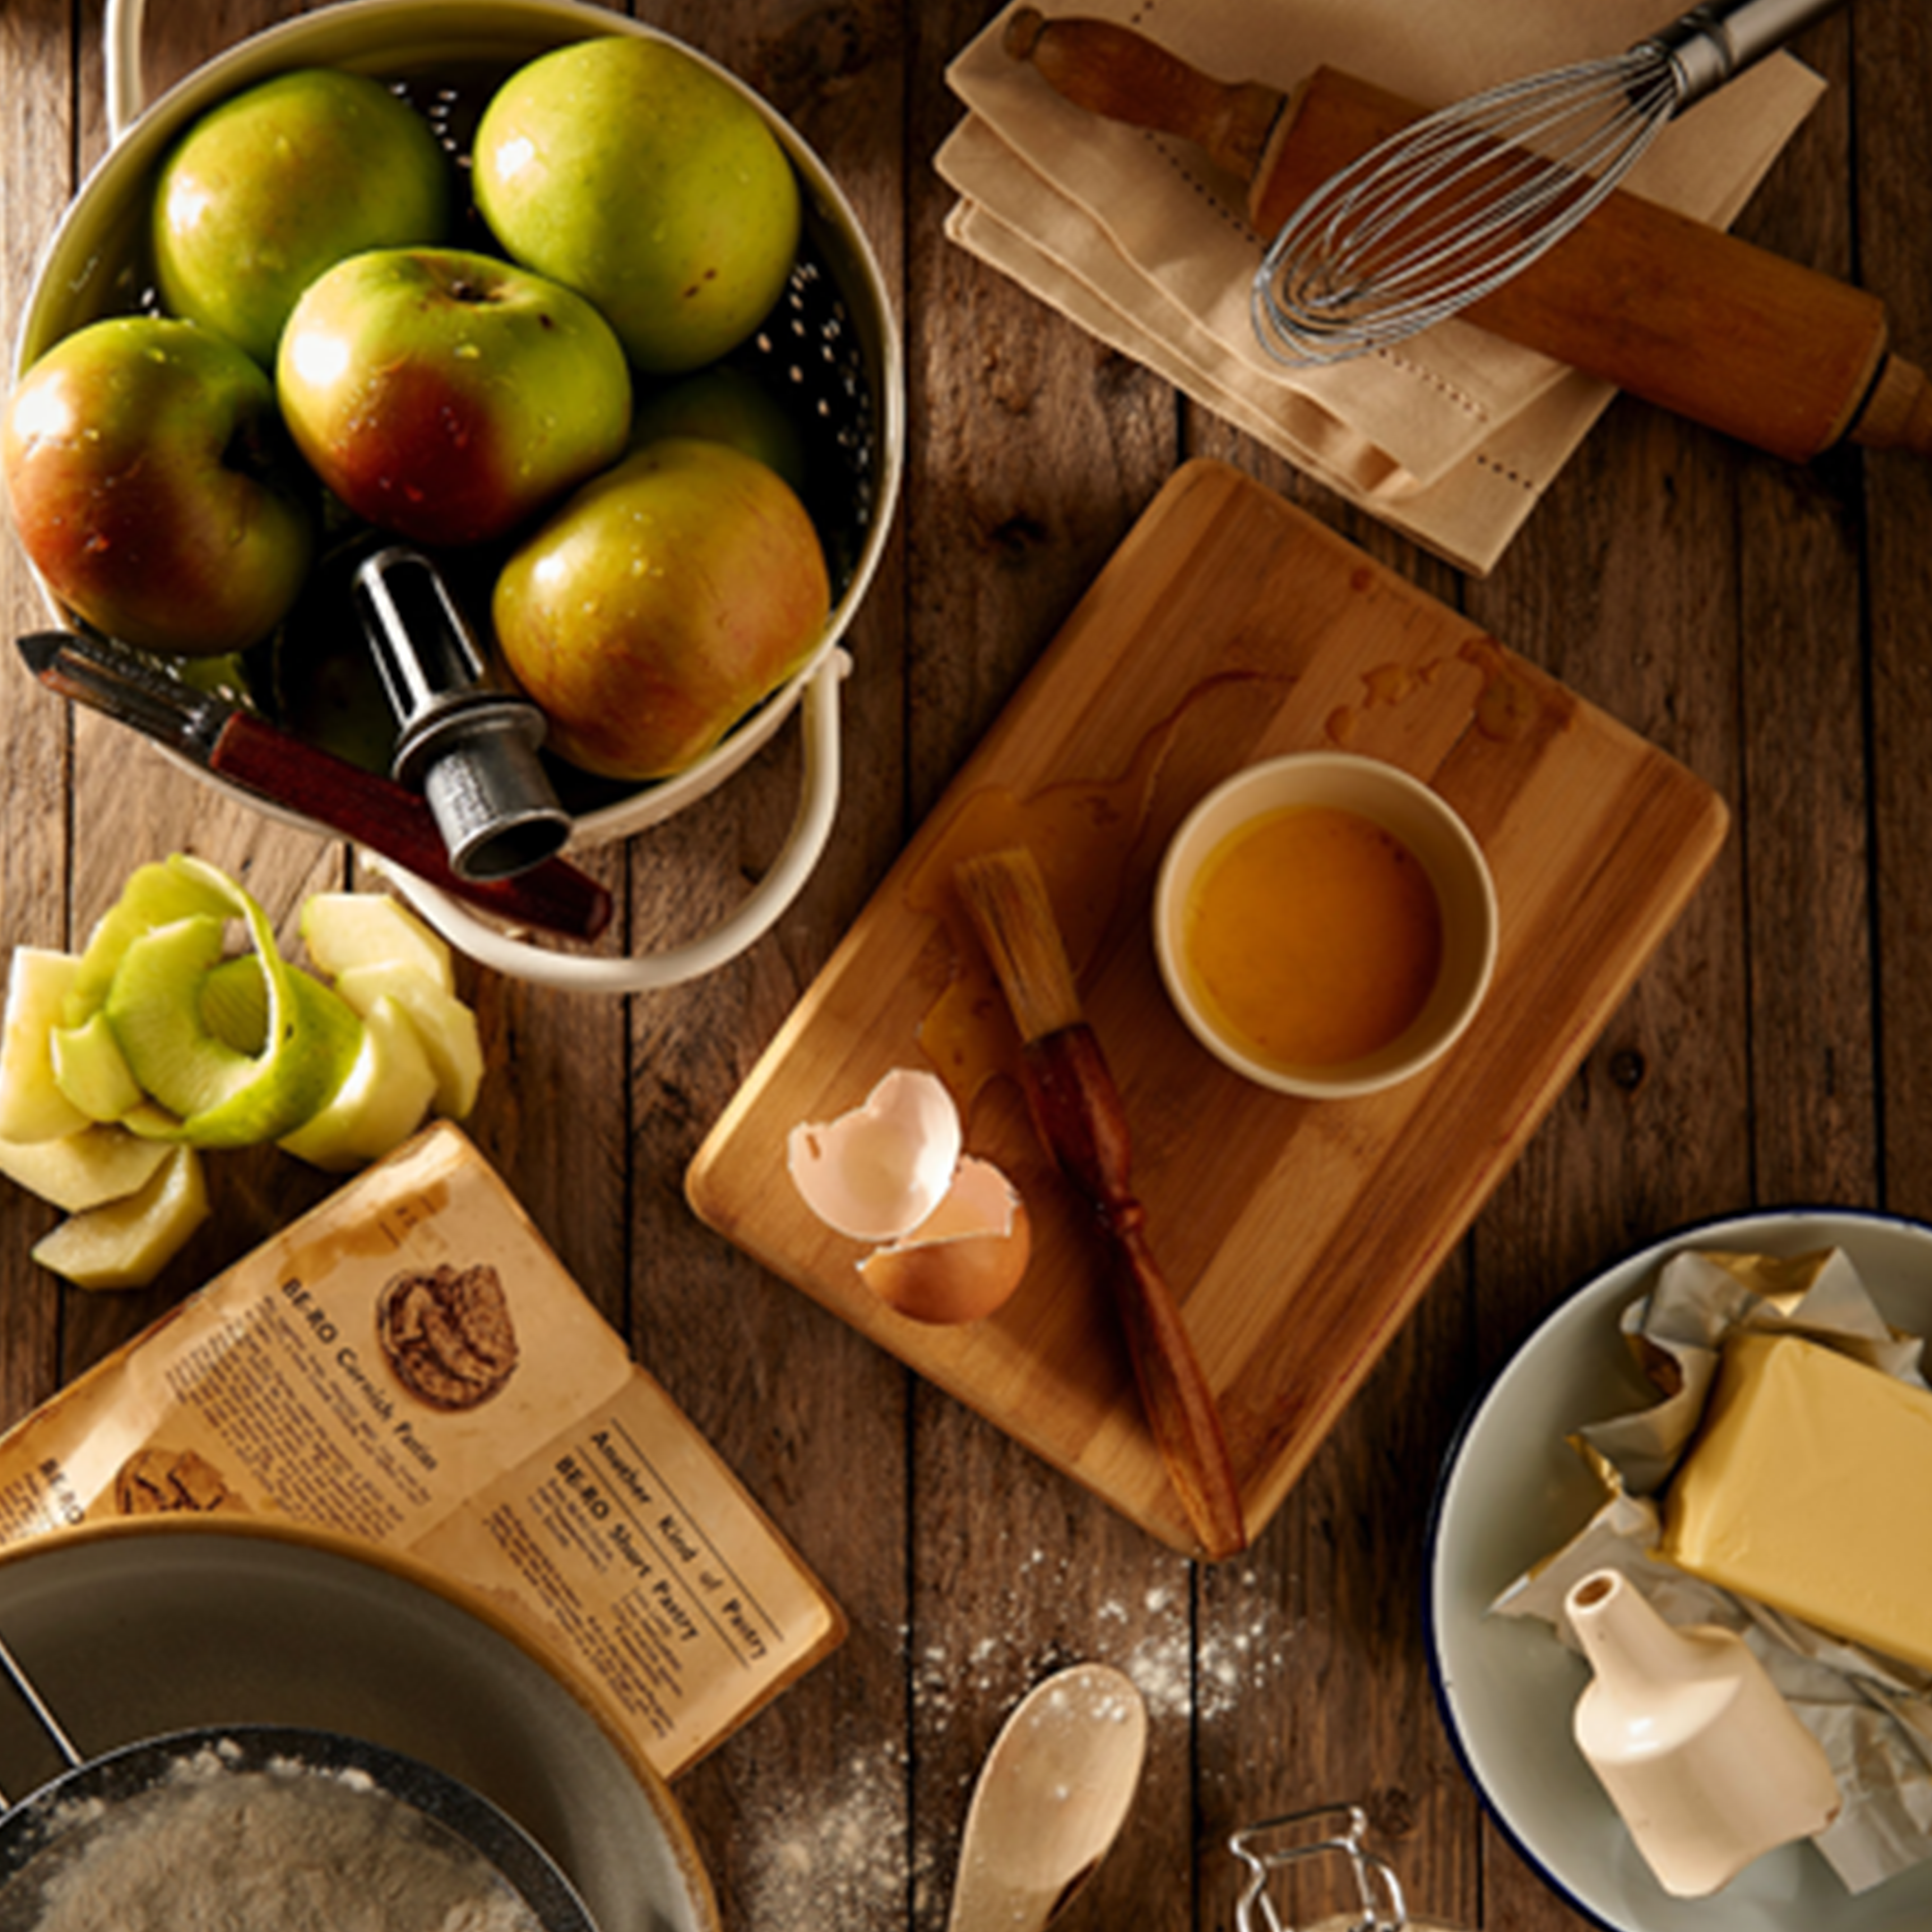 A messy table of someone in the process of making apple pie